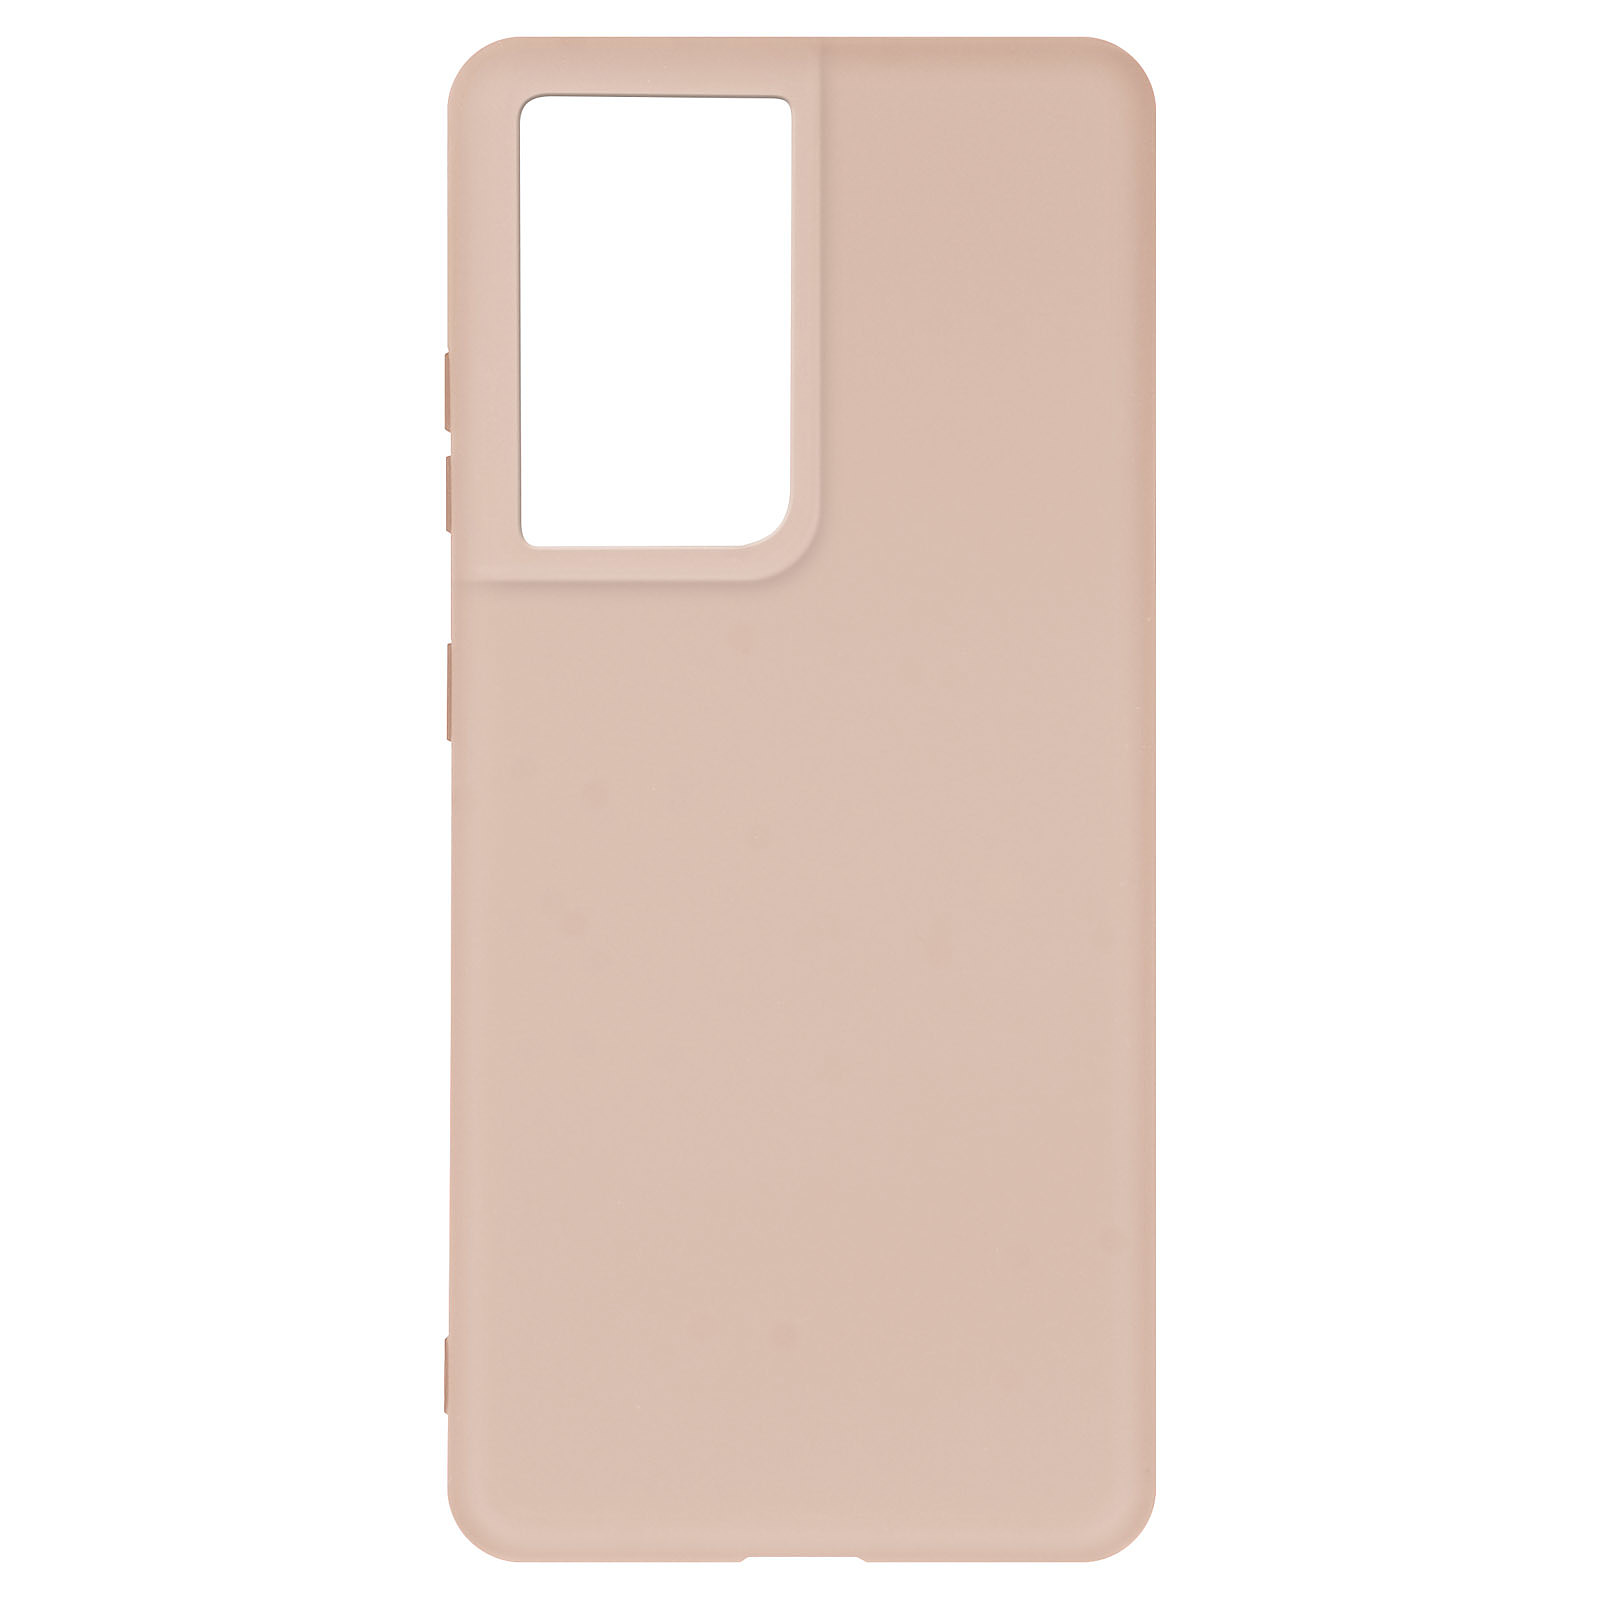 Avizar Coque pour Samsung Galaxy S21 Ultra Silicone Souple Finition Soft Touch Compatible QI Rose - Coque telephone Avizar